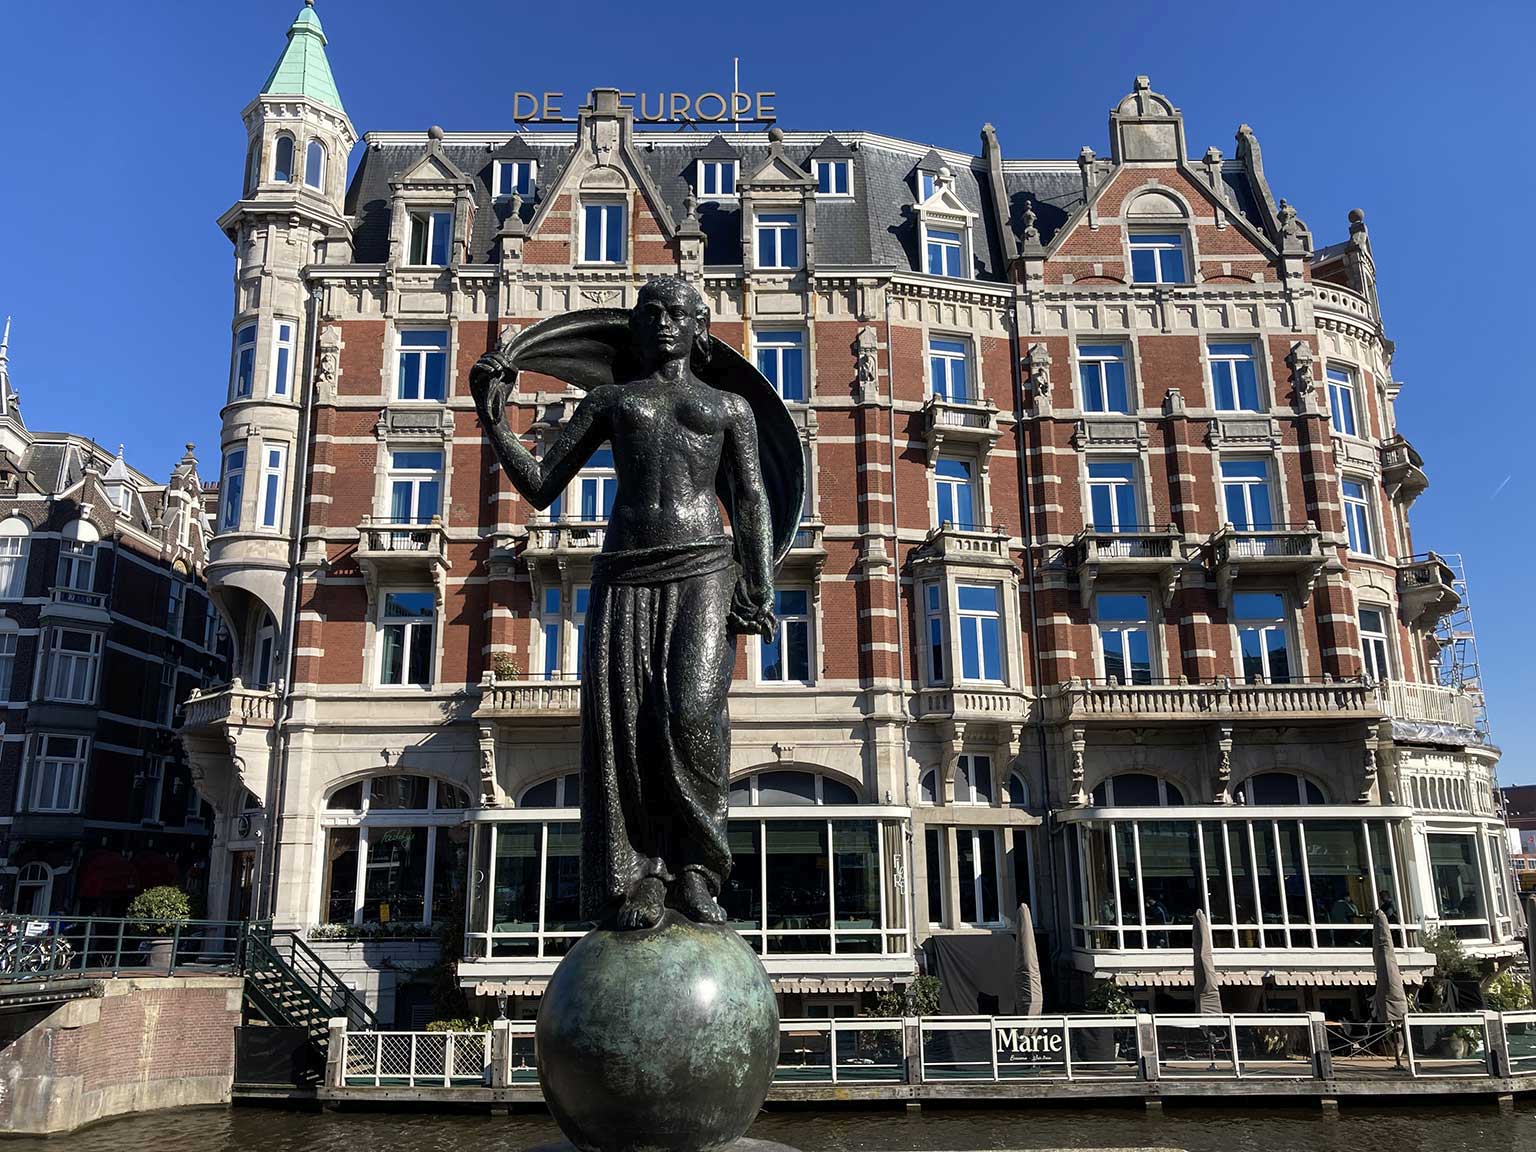 De L'Europe, Amsterdam, seen from Muntplein with statue Fortuna by Hildo Krop in front of it